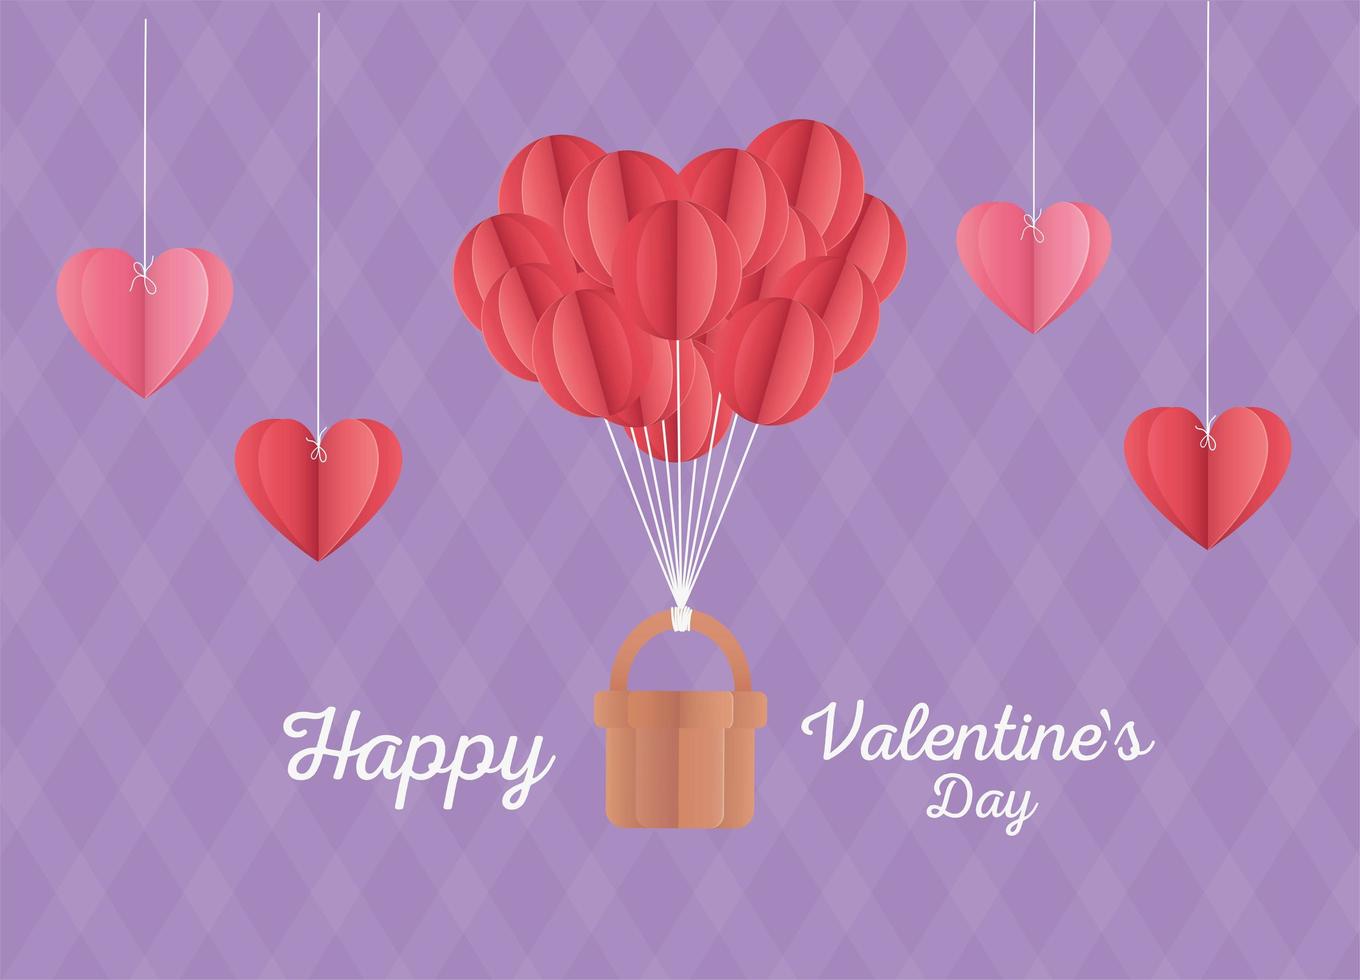 happy valentines day origami hearts balloons basket purple background vector